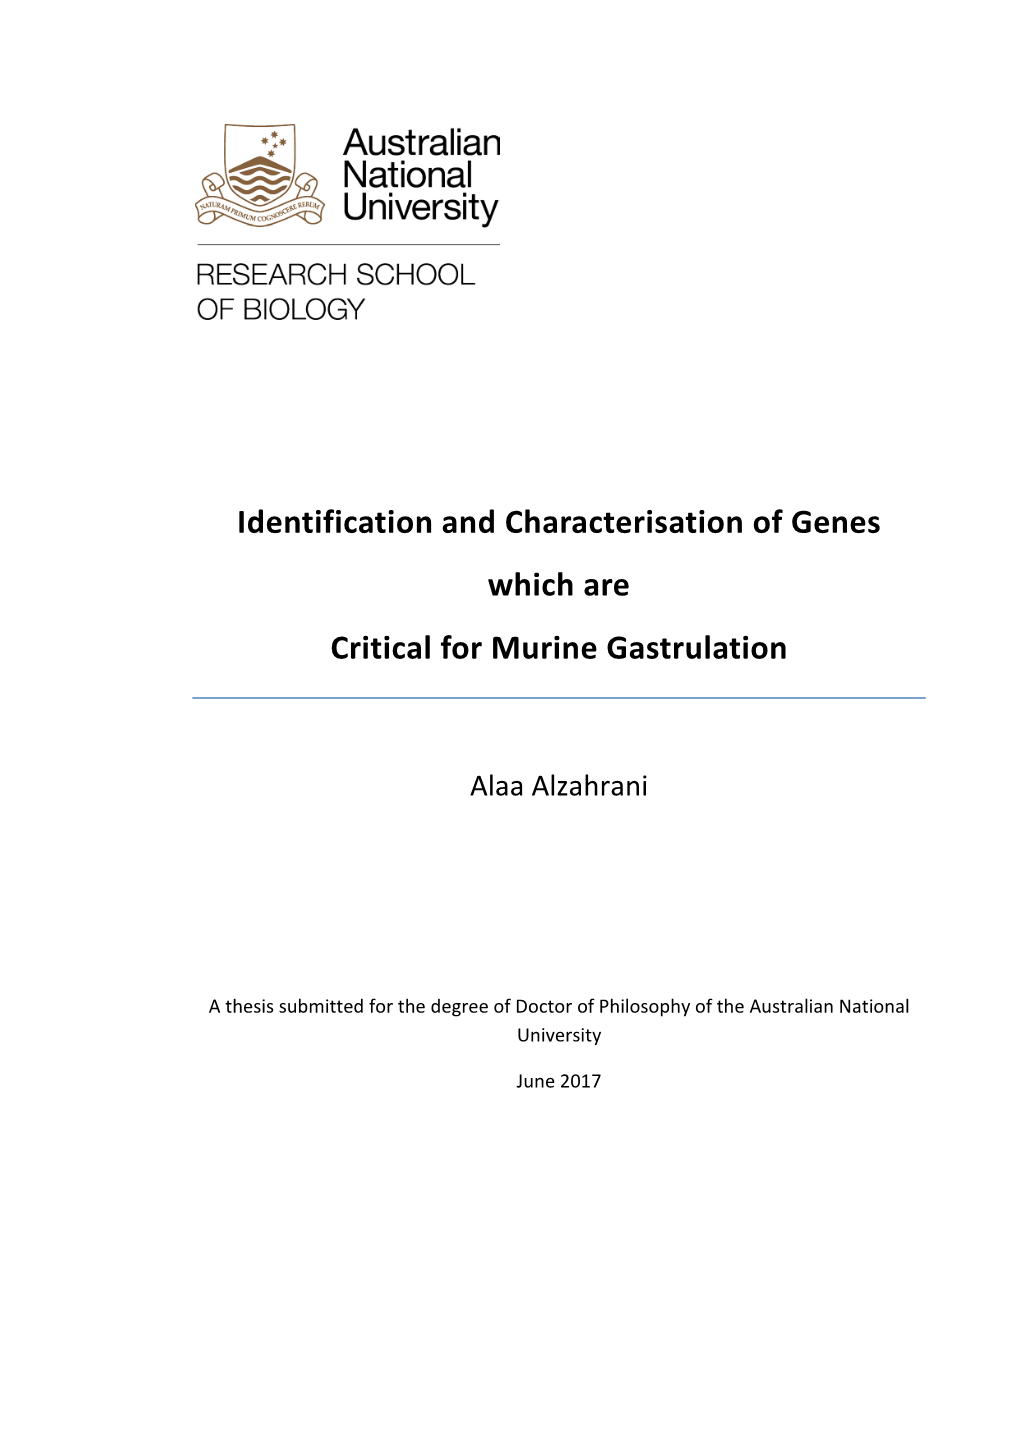 Identification and Characterisation of Genes Which Are Critical for Murine Gastrulation